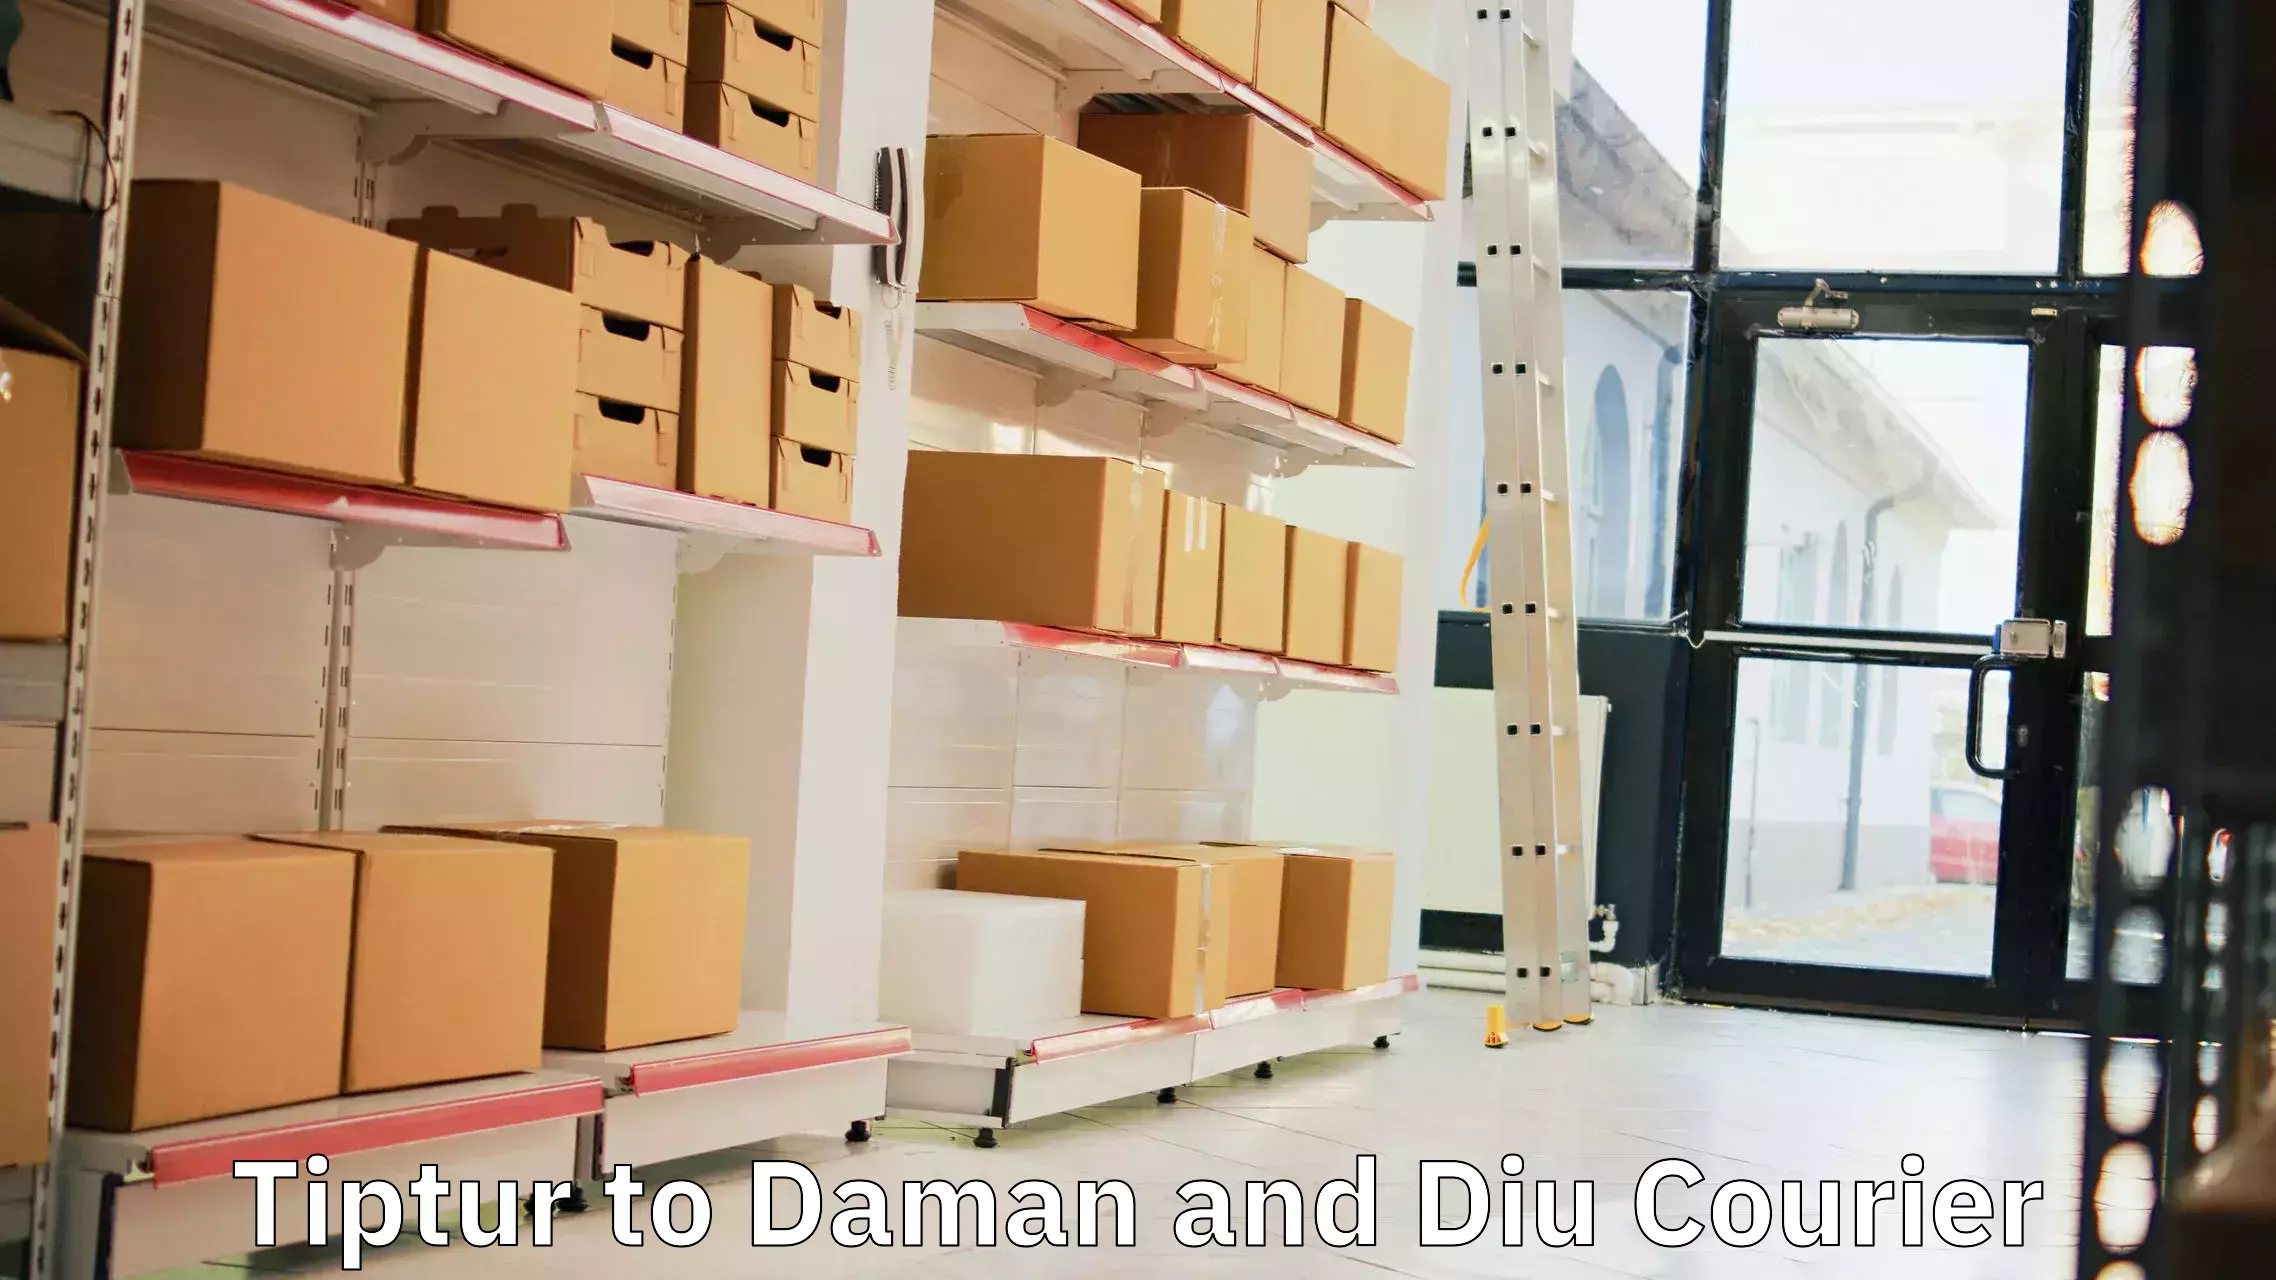 Parcel service for businesses Tiptur to Daman and Diu